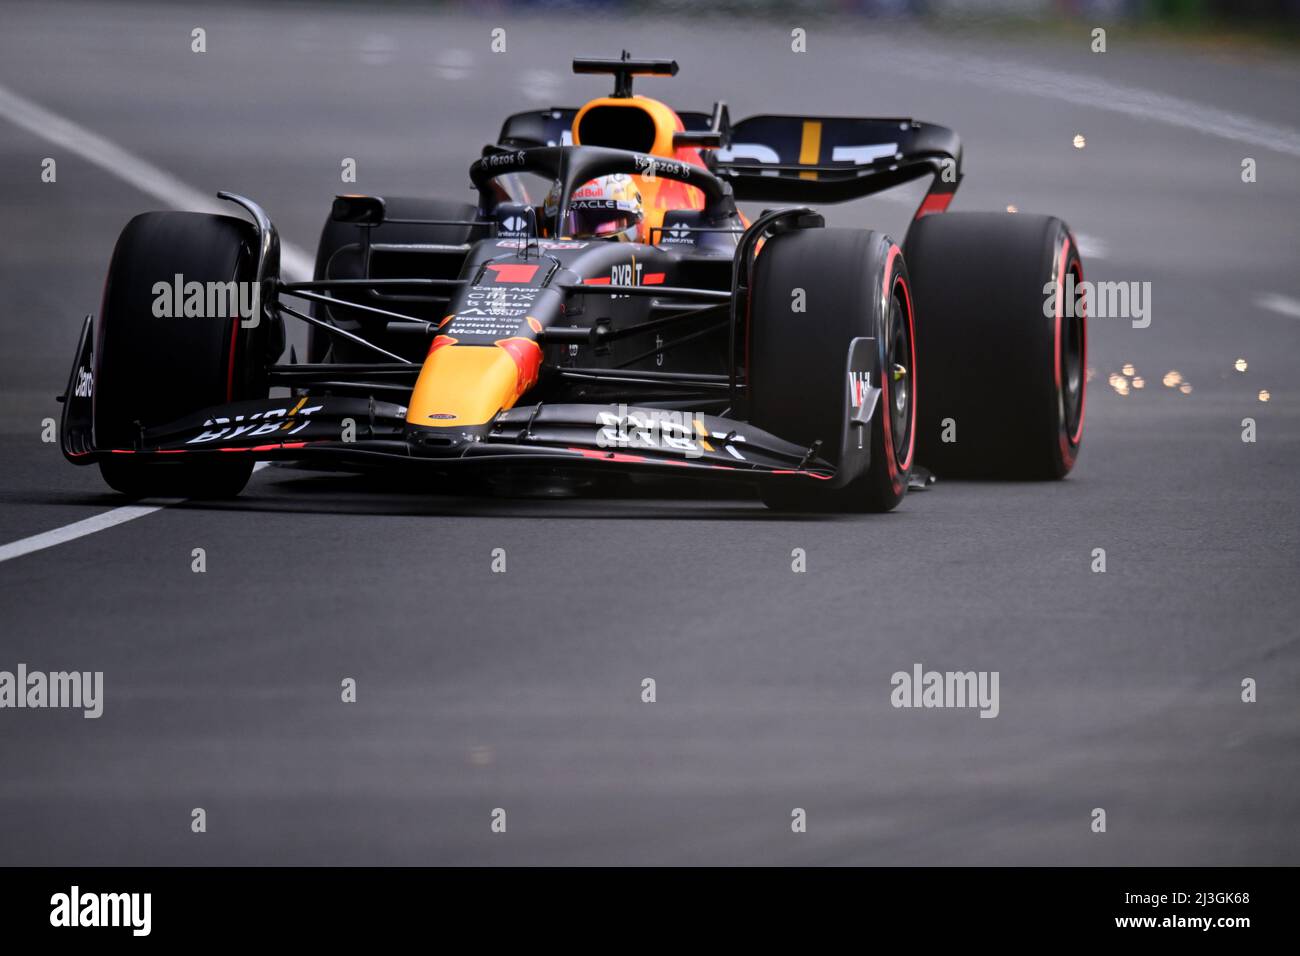 Albert Park, Melbourne, Australia. 8th Apr, 2022. FIA Formula 1 Australian Grand Prix, Free Practise sessions; Max Verstappen of the Netherlands drives the number 1 Oracle Red Bull Racing RB18 during practice Credit: Action Plus Sports/Alamy Live News Stock Photo